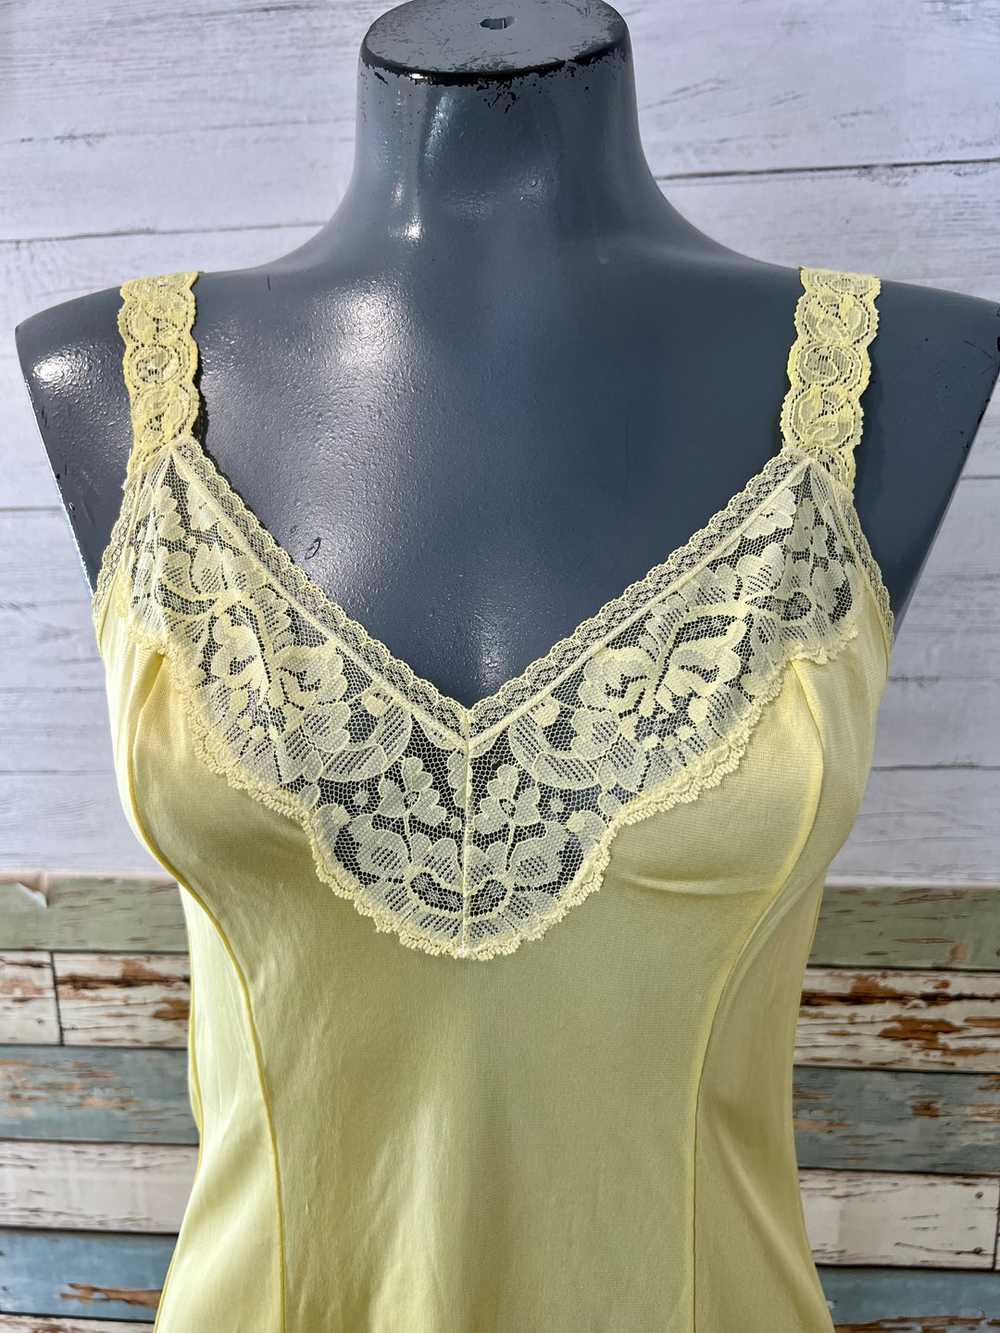 70’s Yellow Slip Dress with Lace - image 3